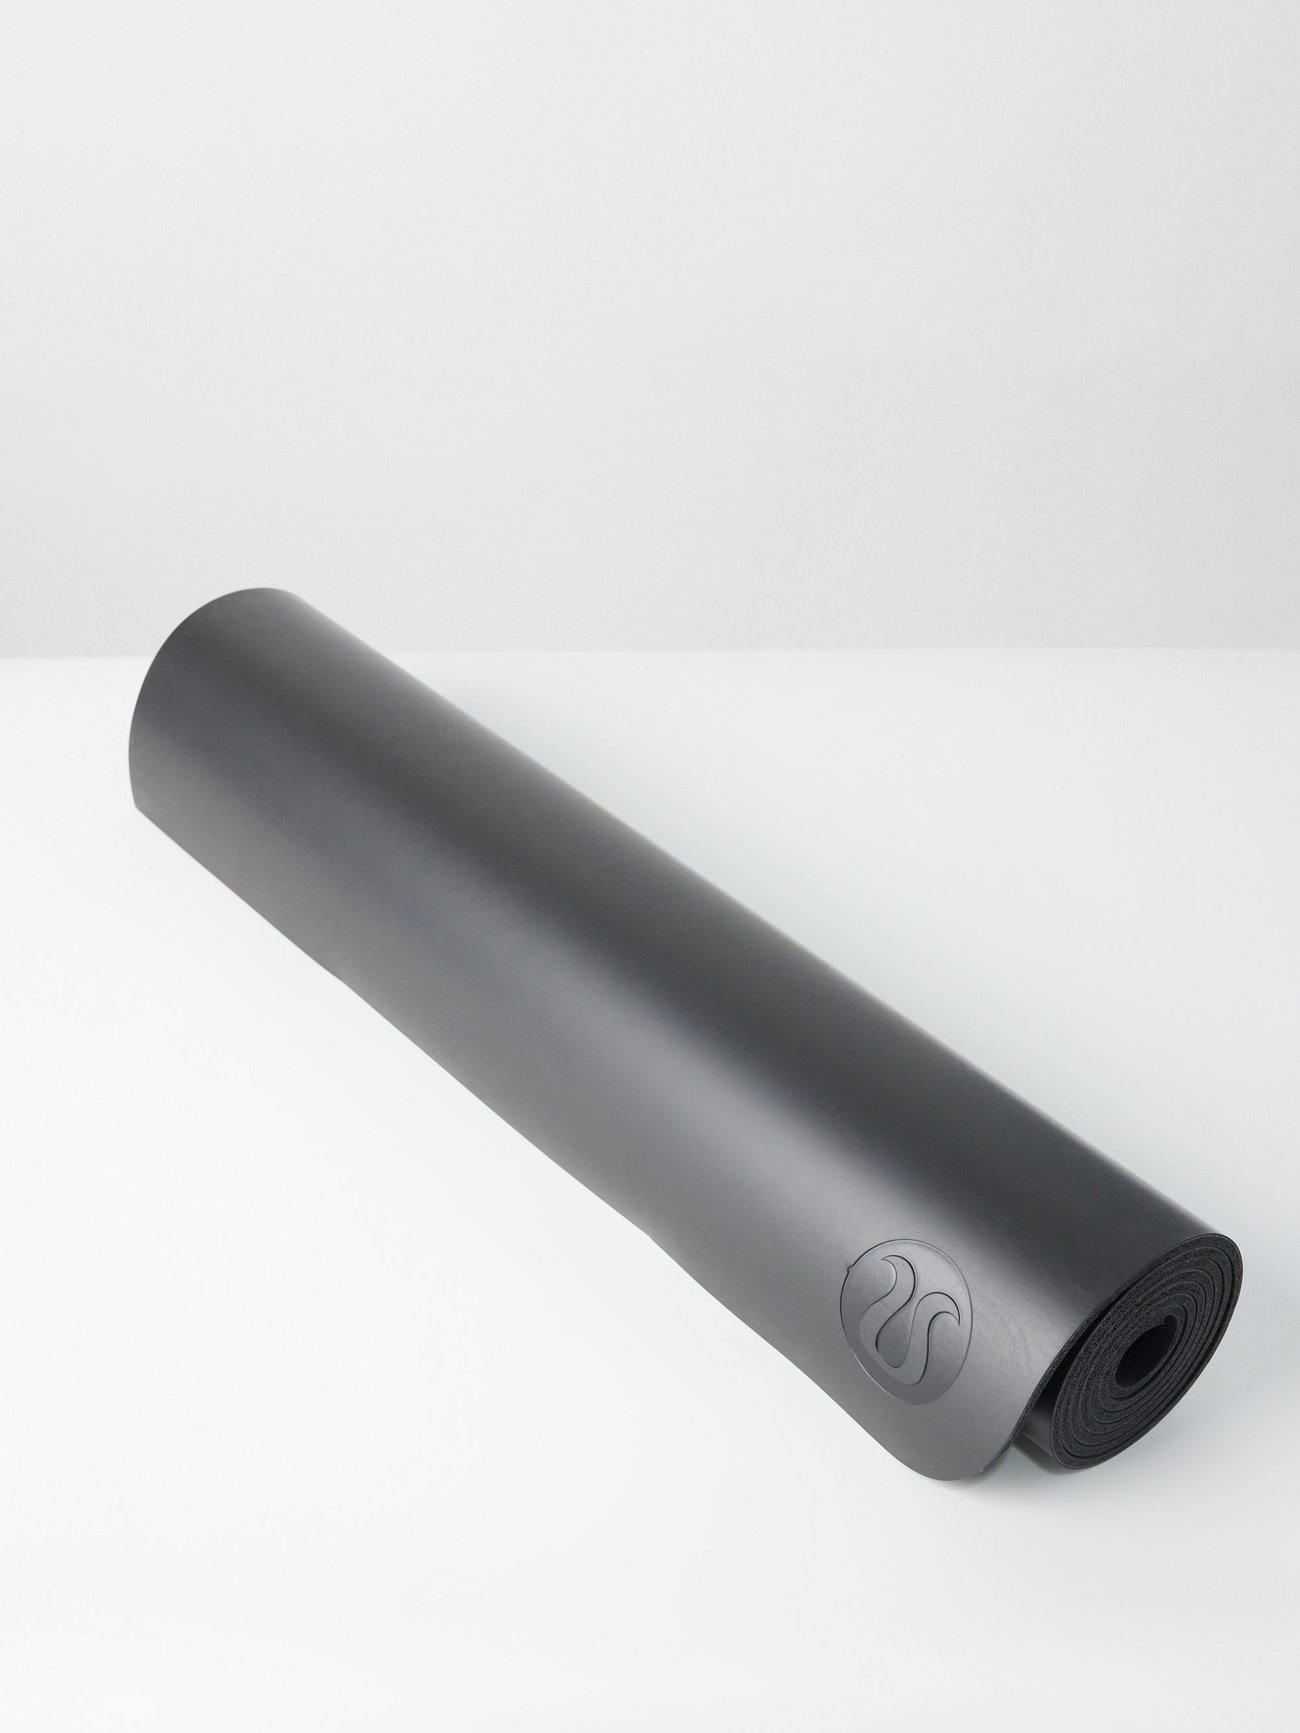 The Mat 5mm *Made With FSC™ Certified Rubber